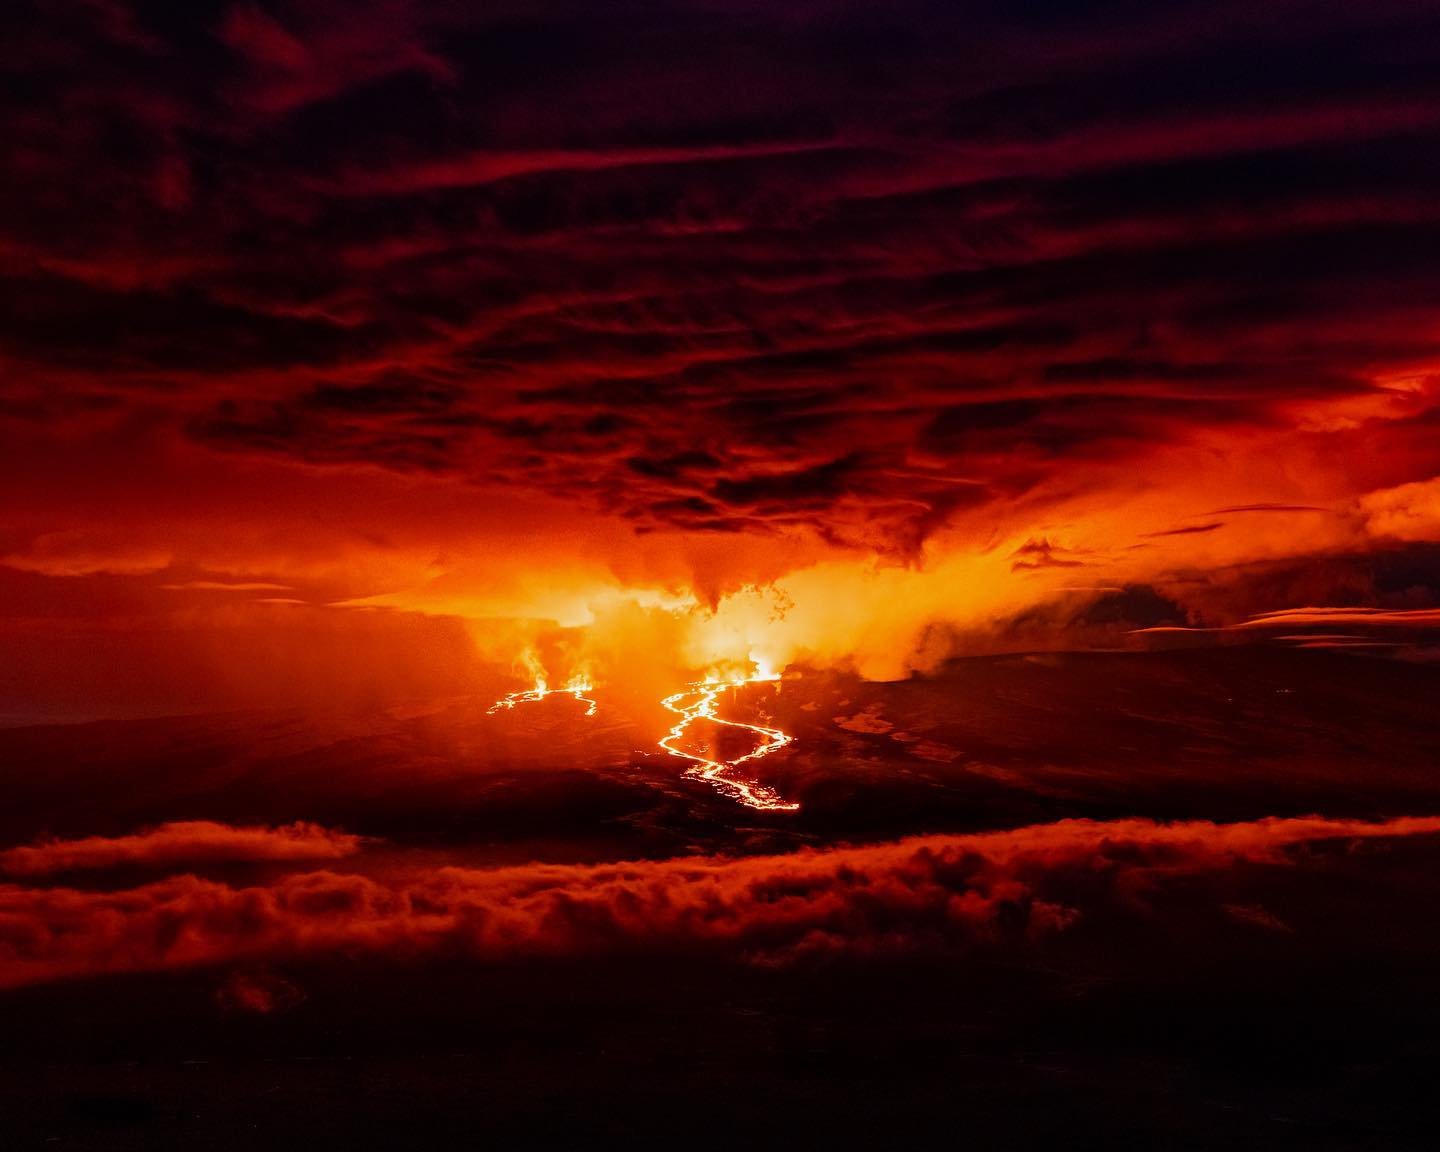 The epic moment of red, orange and yellow clouds and lava  flows (image: Miles Lucas)